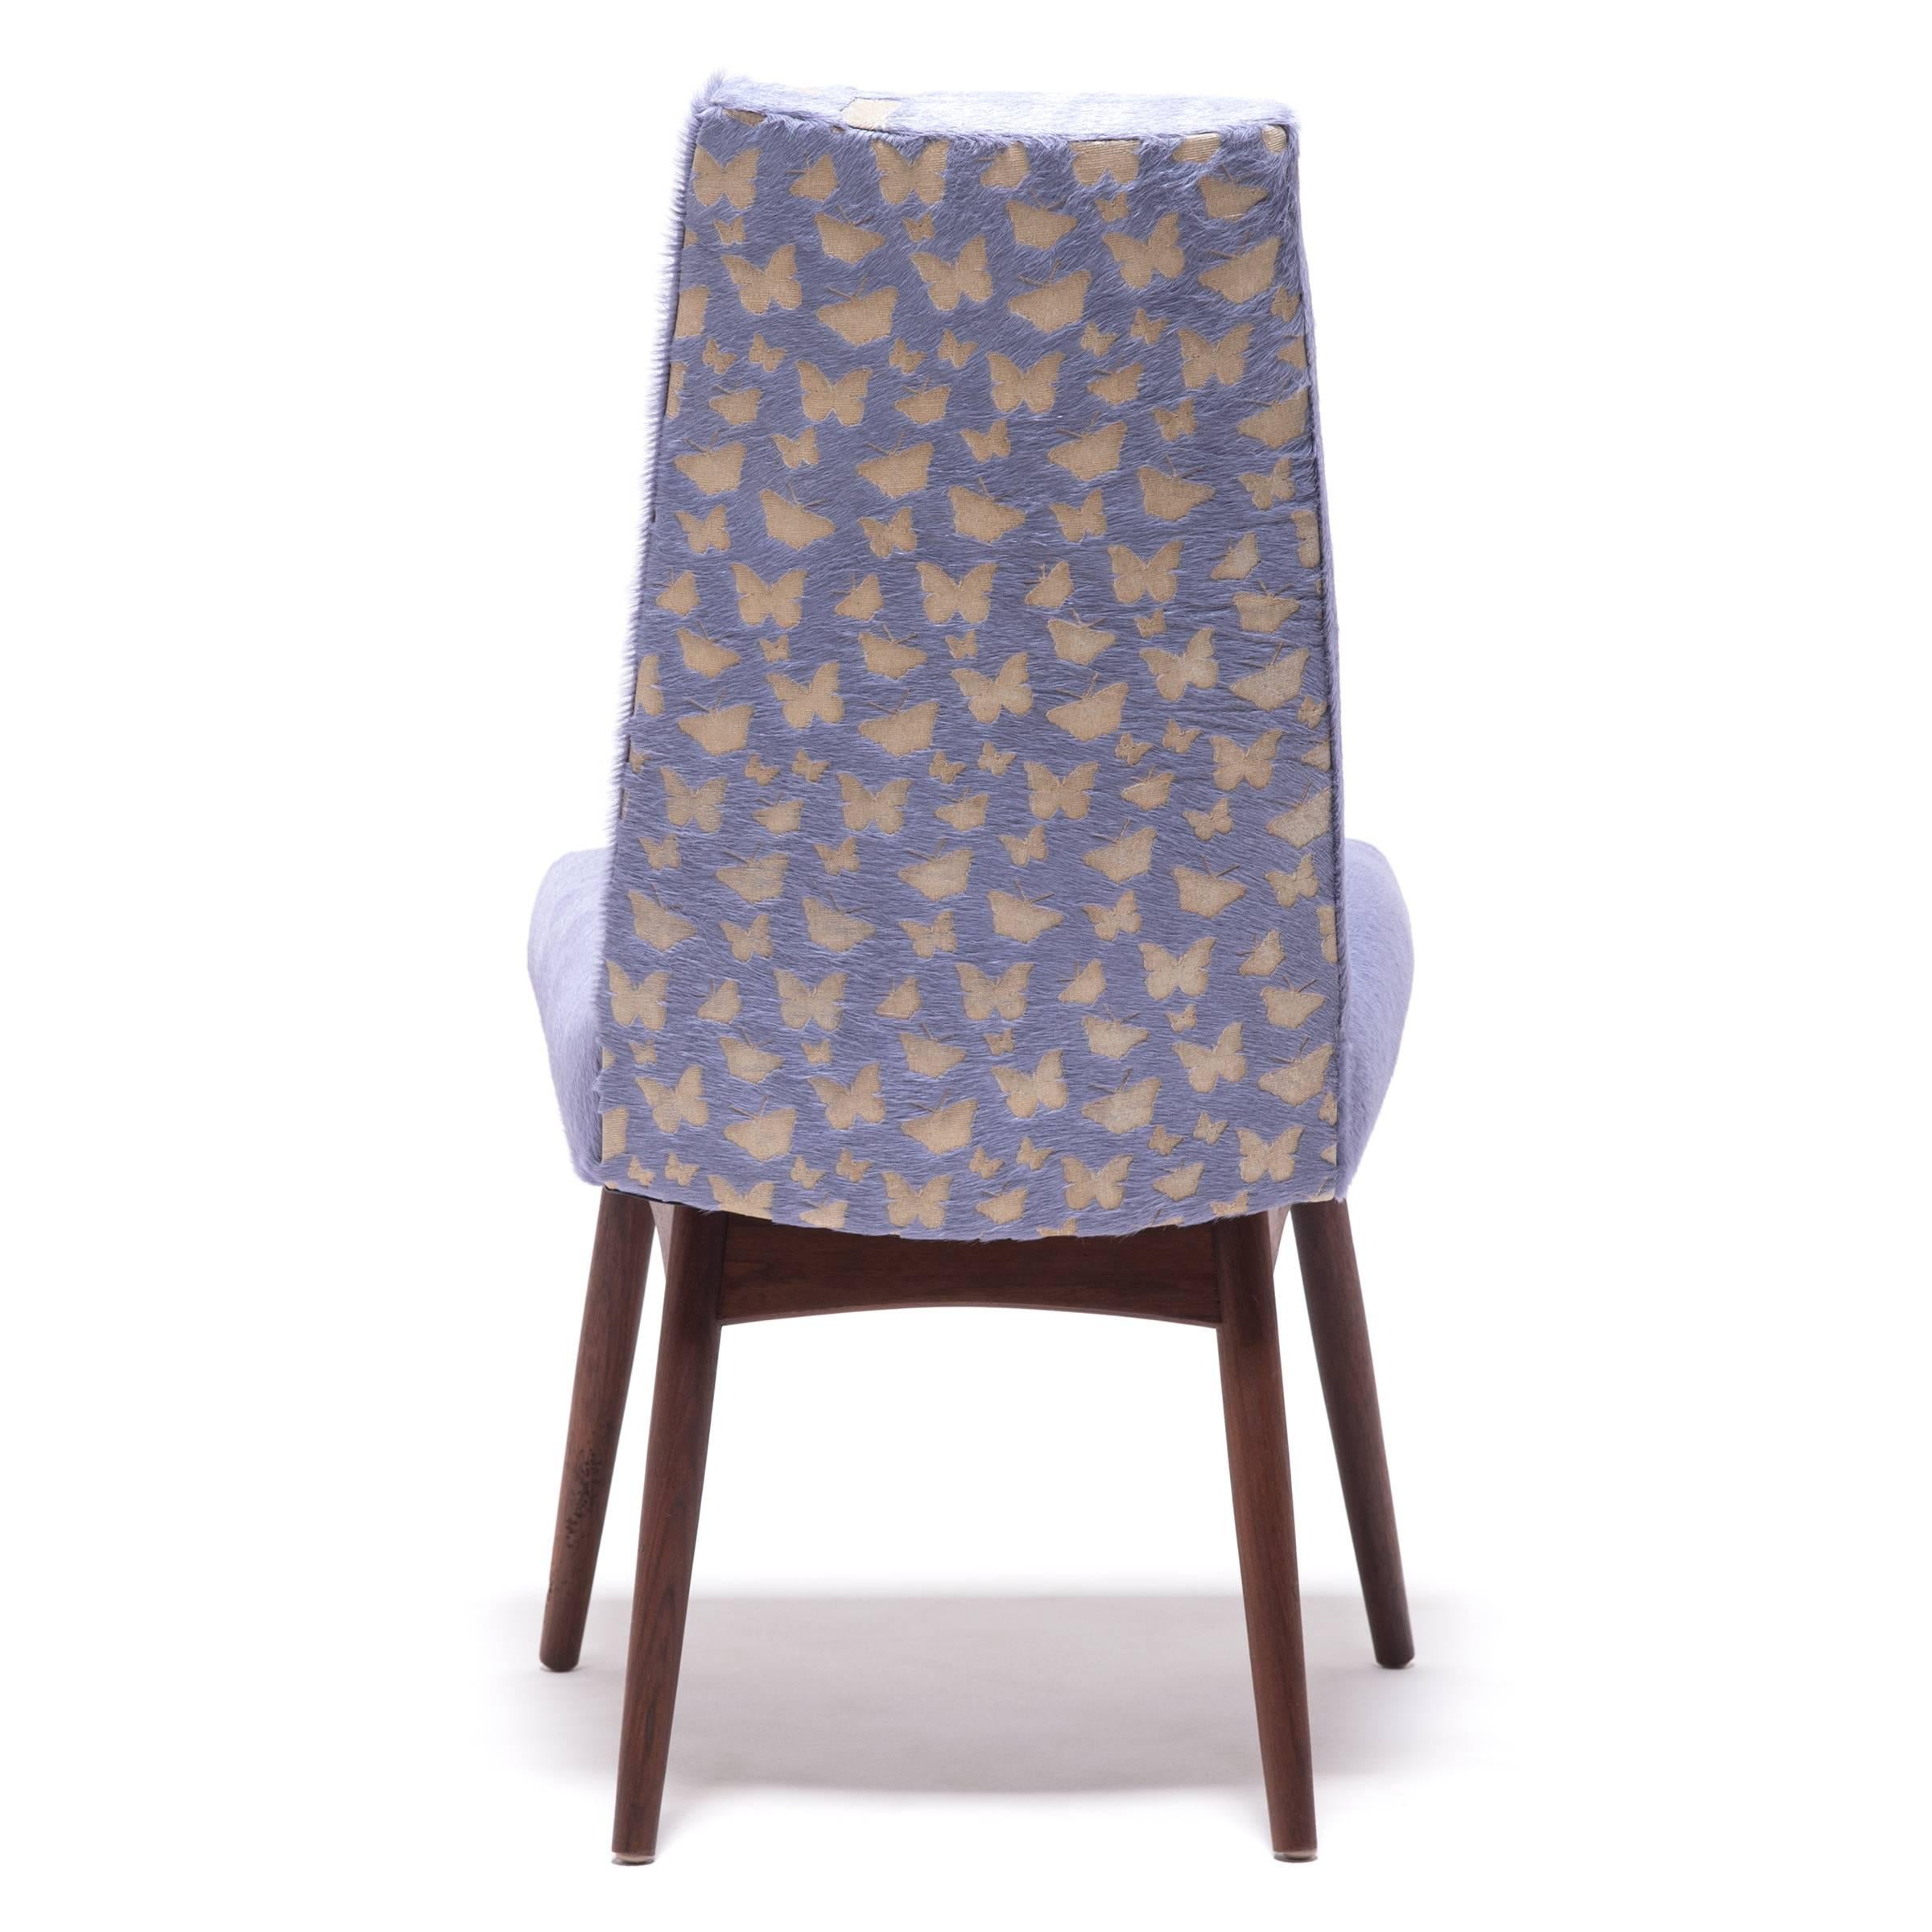 20th Century Vintage Pearsall Chair with Laser-Cut Butterflies on Hide